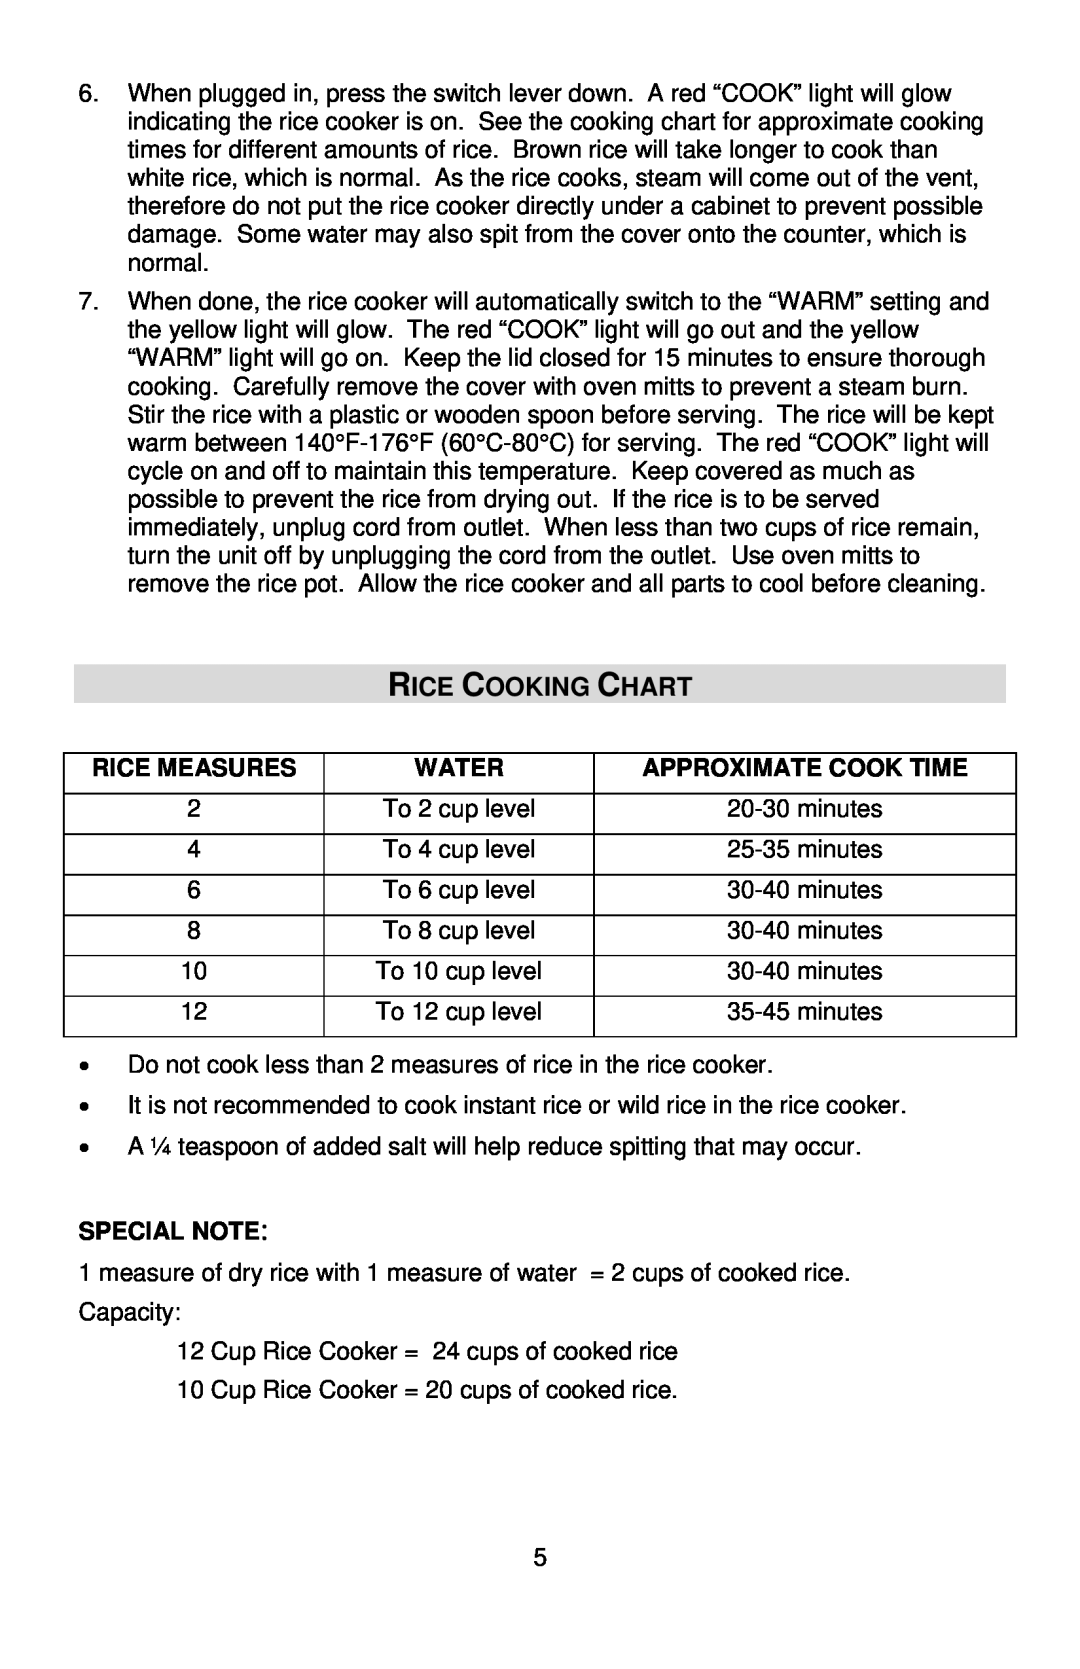 West Bend L5551E instruction manual Rice Cooking Chart, Rice Measures, Water, Approximate Cook Time, Special Note 